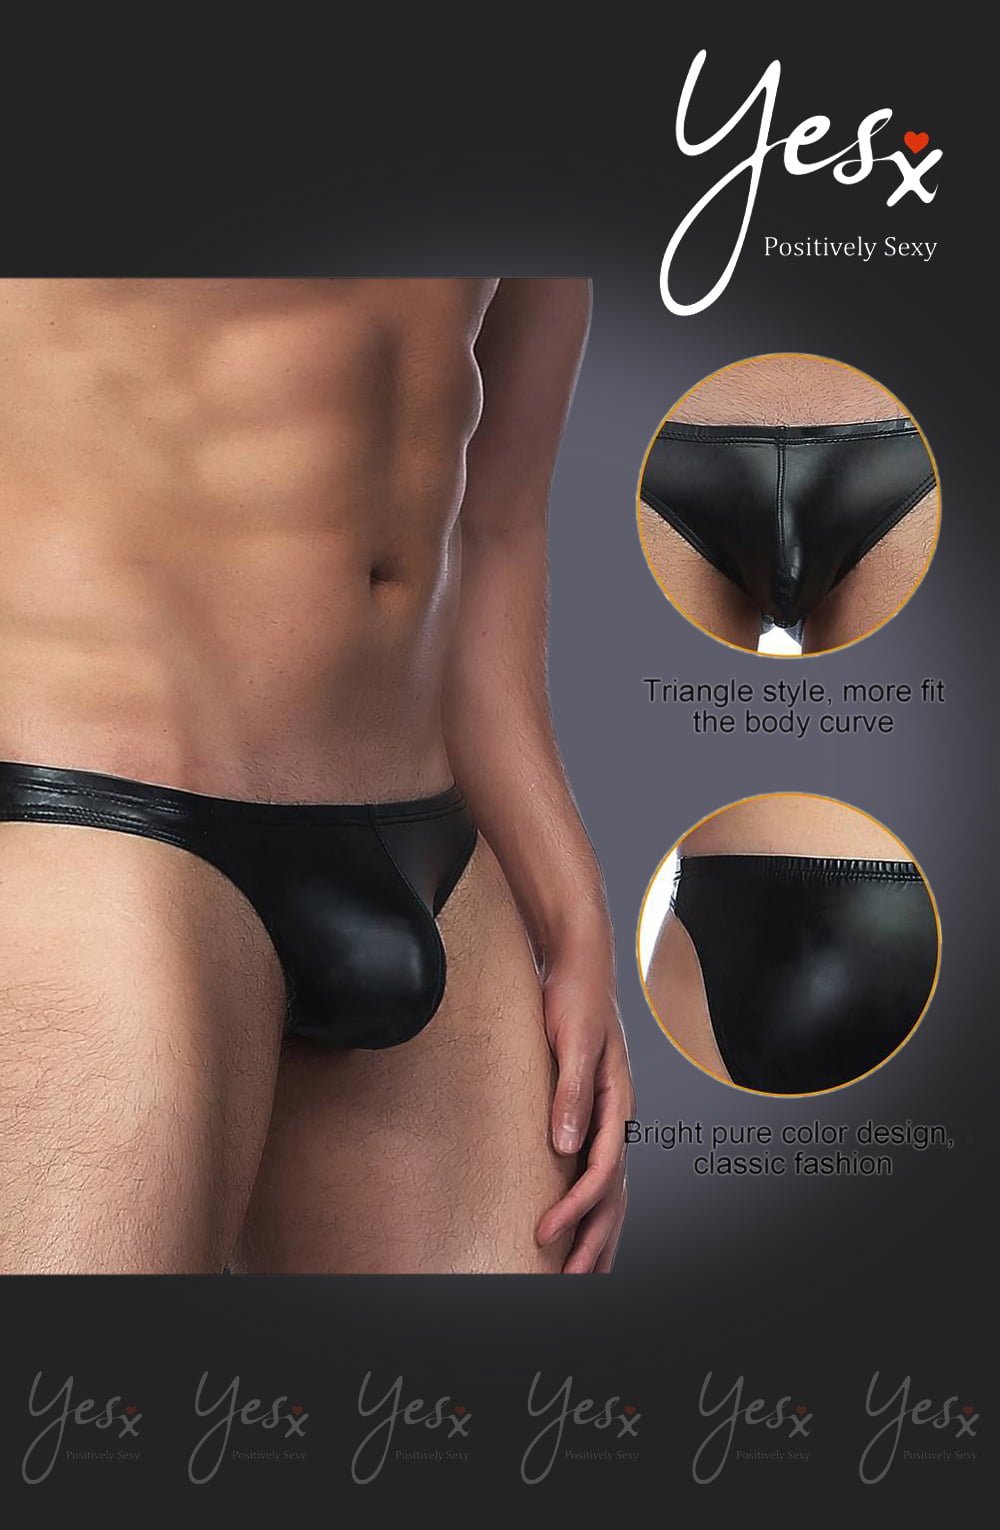 YesX YX969 Stretchy Men's Brief in Black - Enhanced Fit & Alluring Wet Look